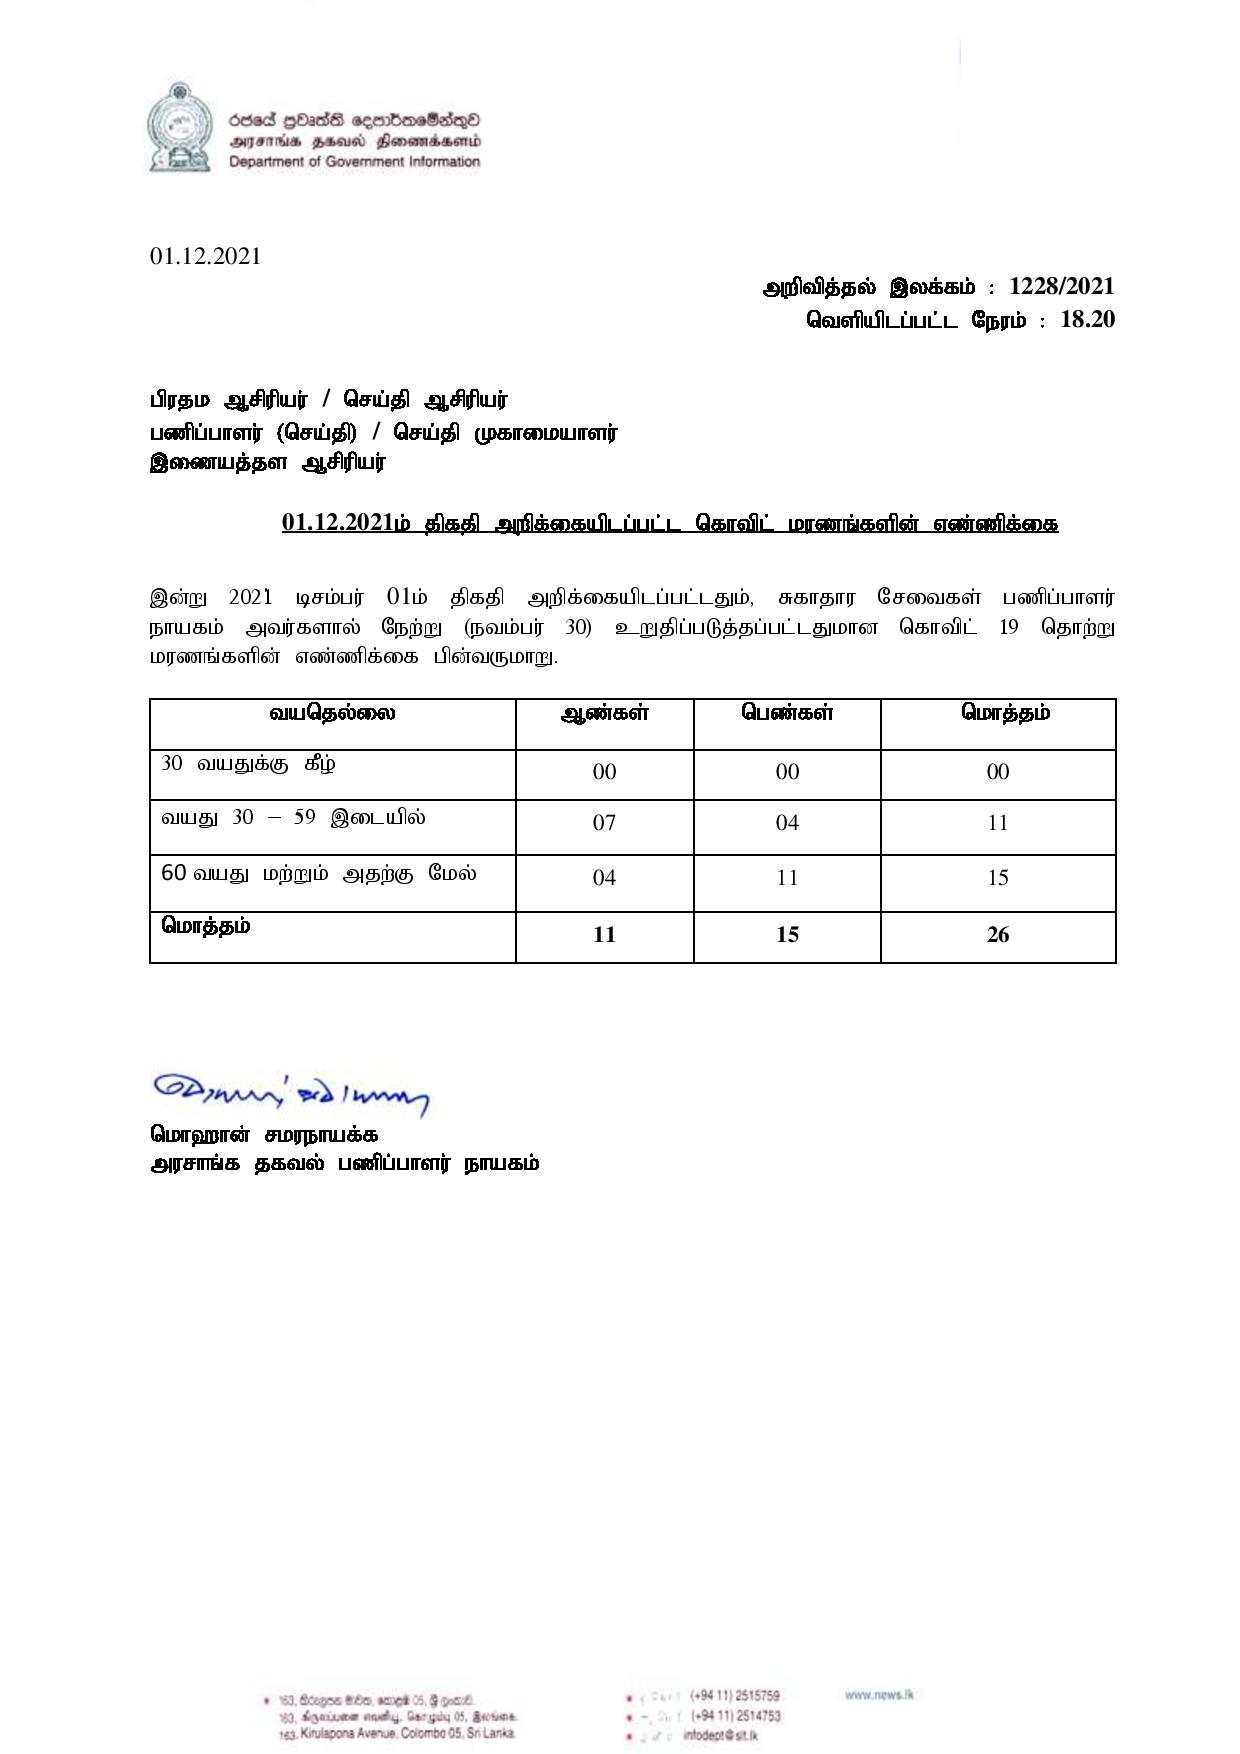 Release No 1228 Tamil page 001